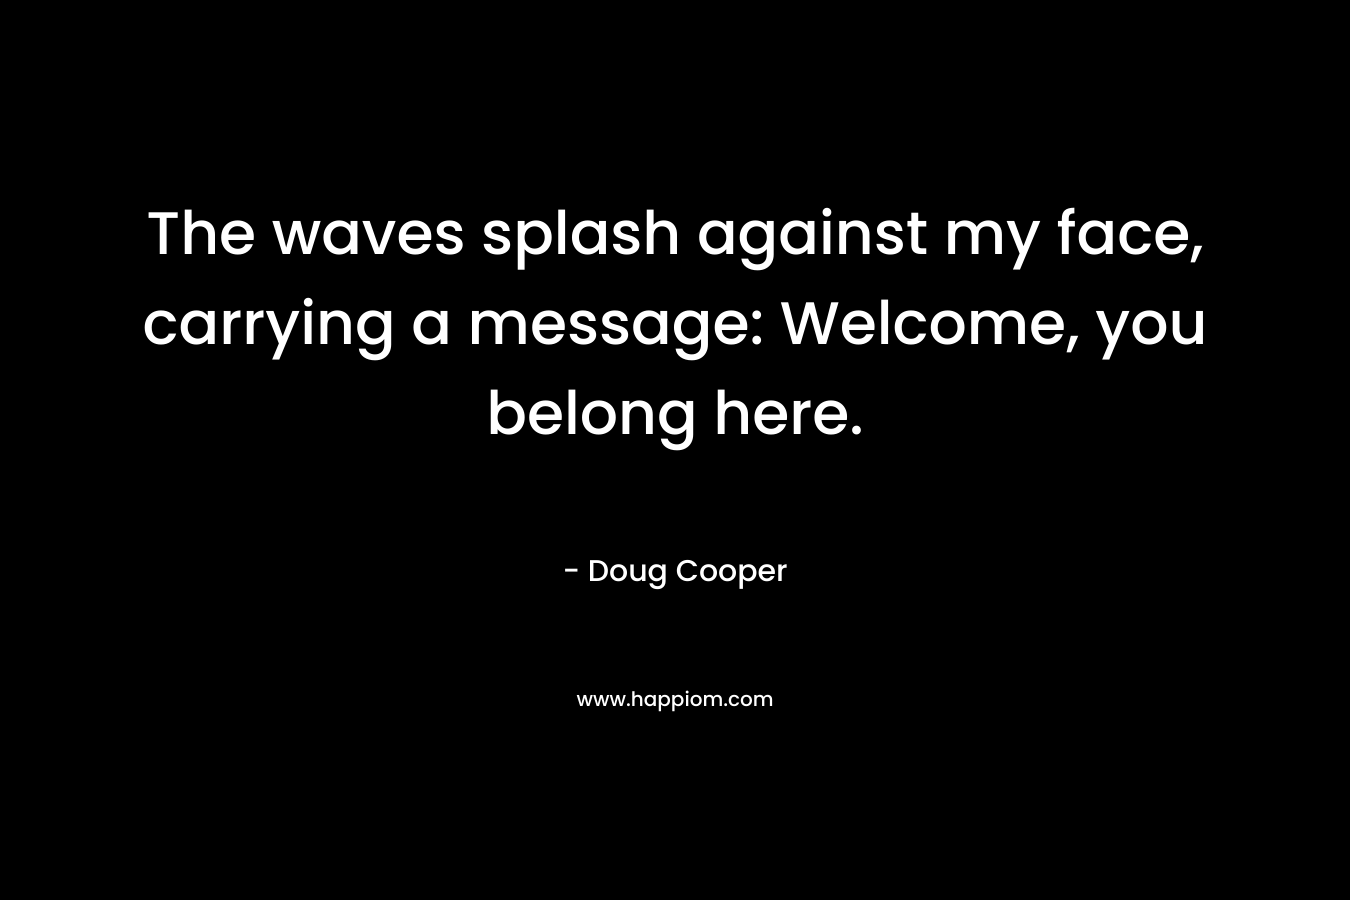 The waves splash against my face, carrying a message: Welcome, you belong here.